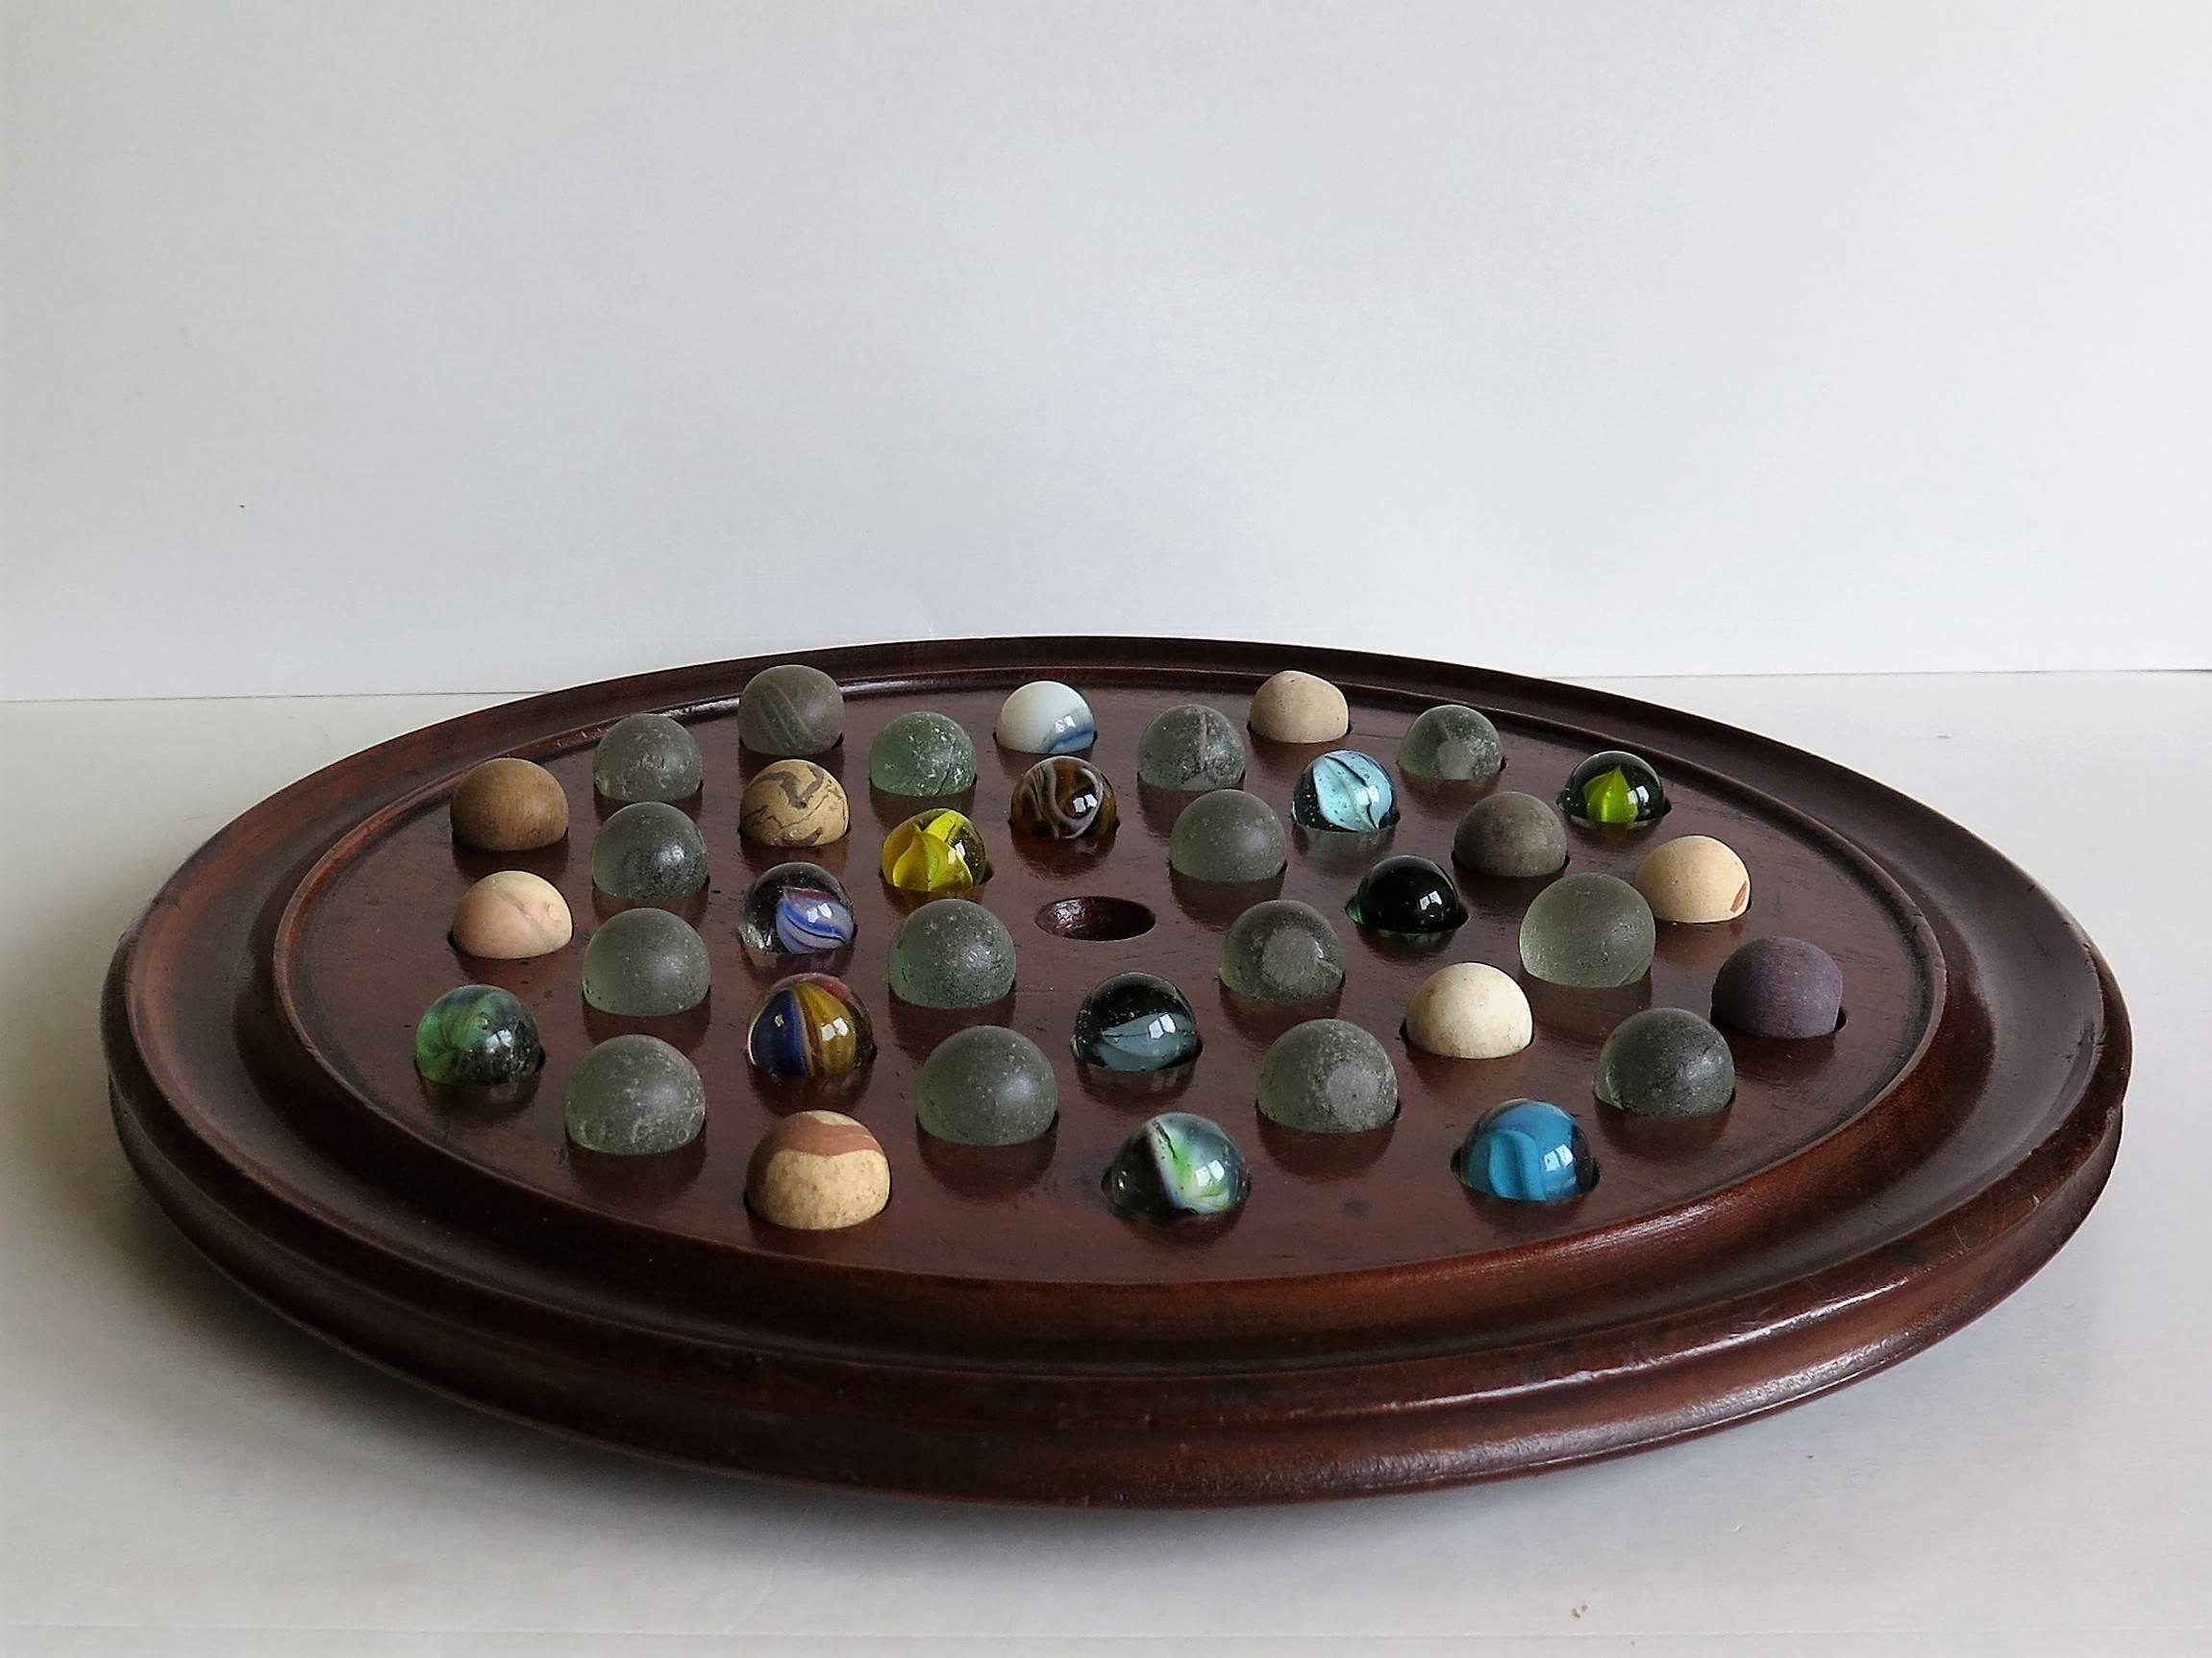 This is a complete game of table marble solitaire from the 19th century of a large diameter, and with 36 marbles.

The circular turned board is made of mahogany and has a much larger 12 inch diameter than is normal (usually they are only 7/8/9